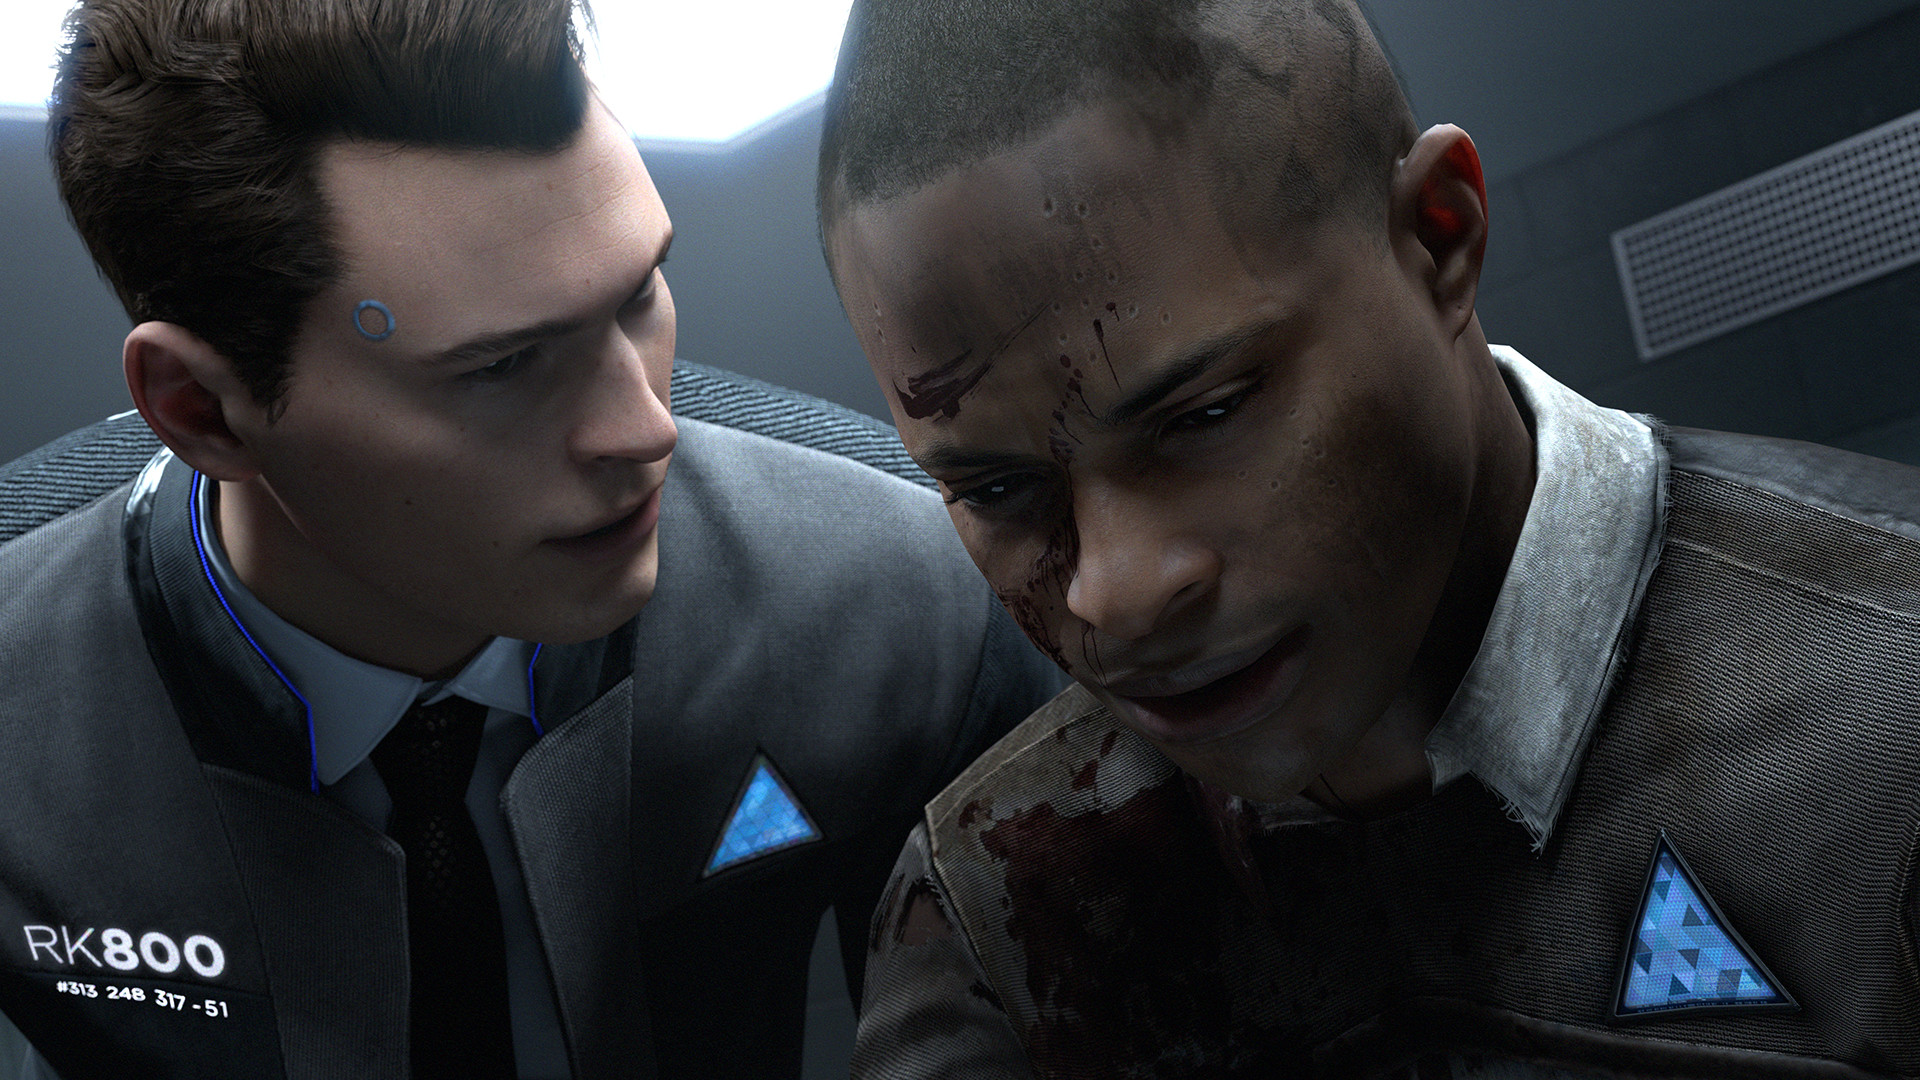 Save 60% on Detroit: Become Human on Steam